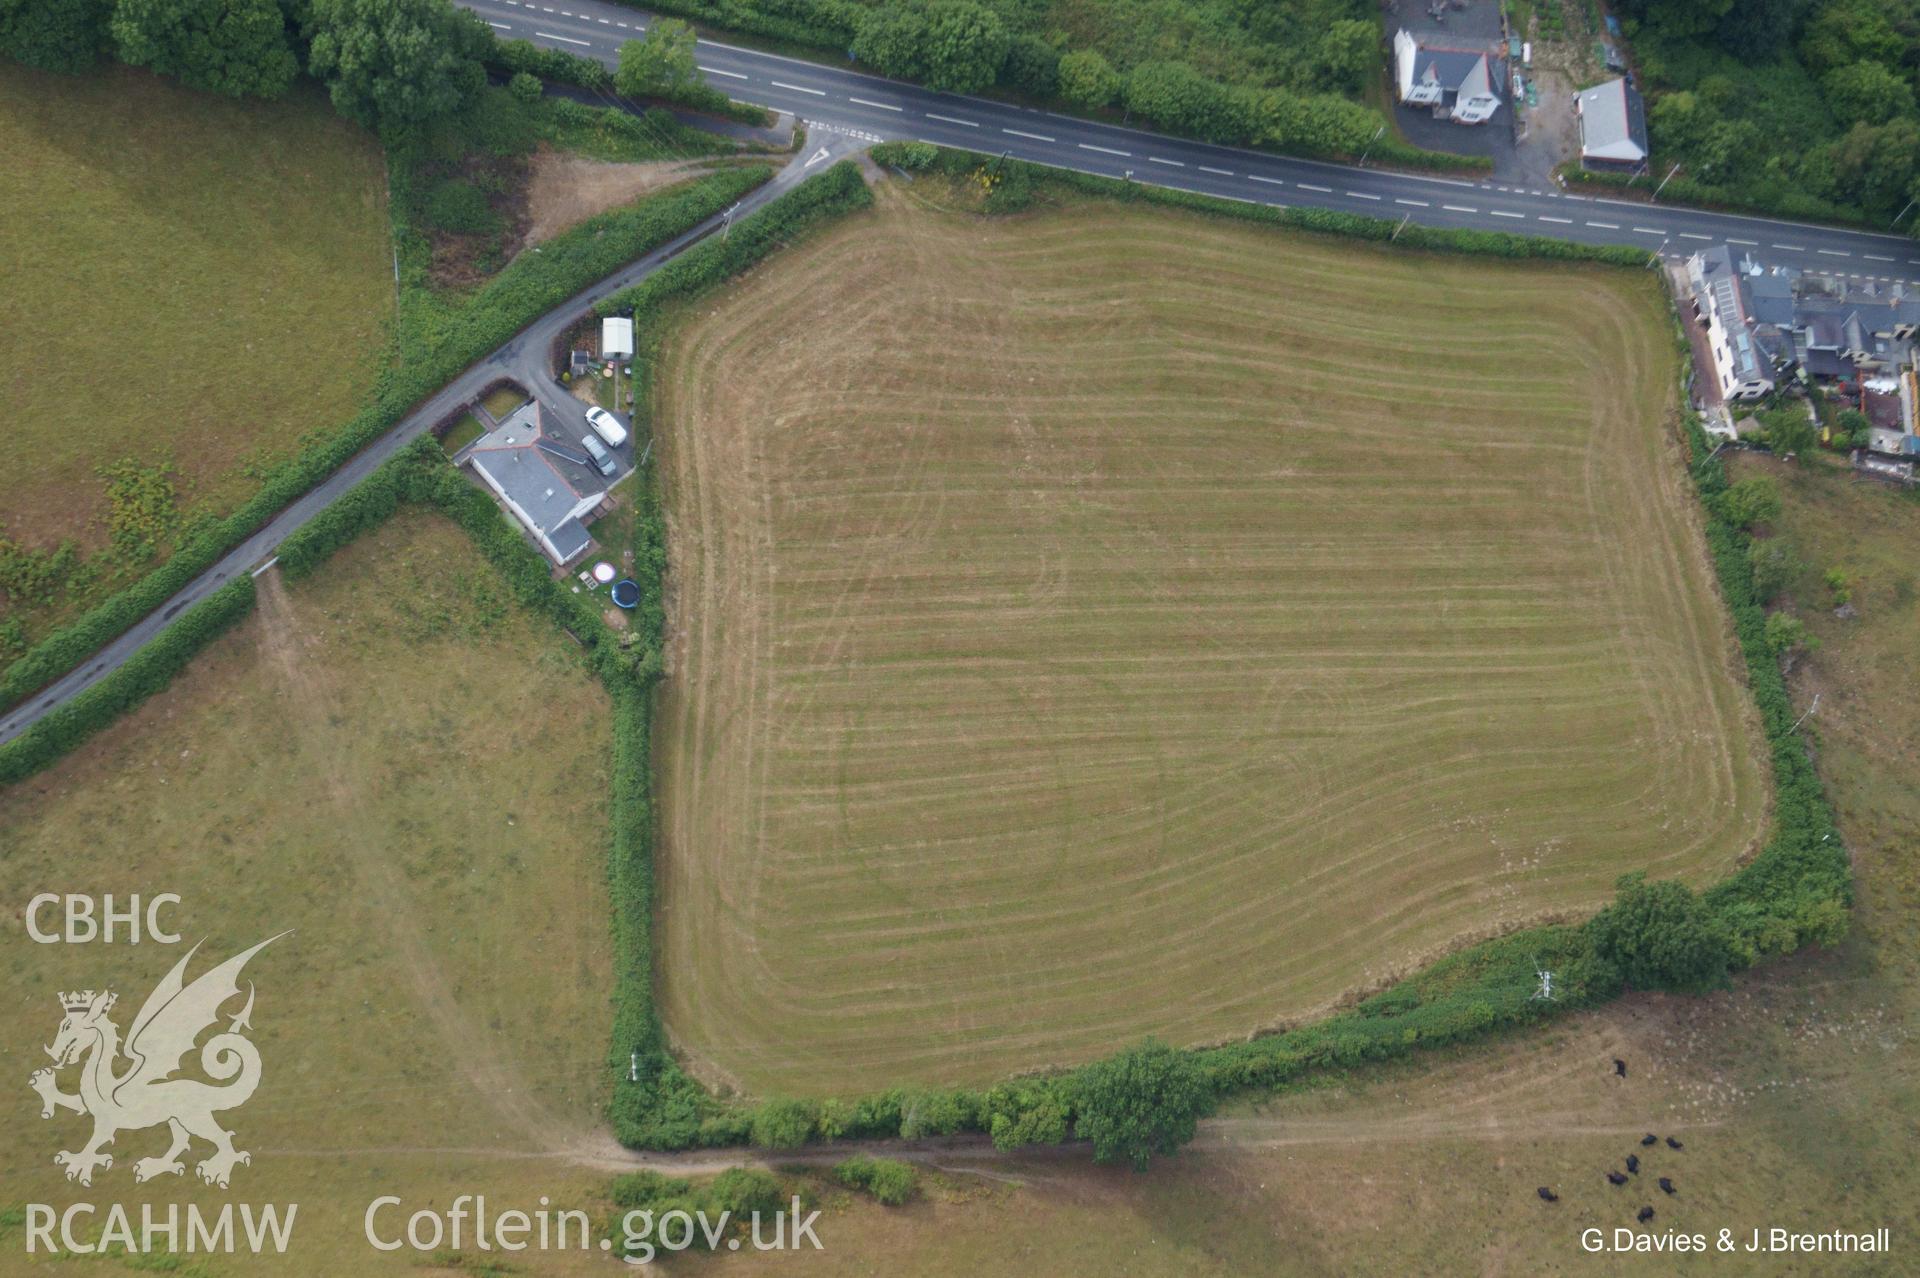 Aerial photograph of cropmarks on the south western outskirts of Talybont, taken by Glyn Davies and Jonathan Brentnall on 21st July 2018 under drought conditions.